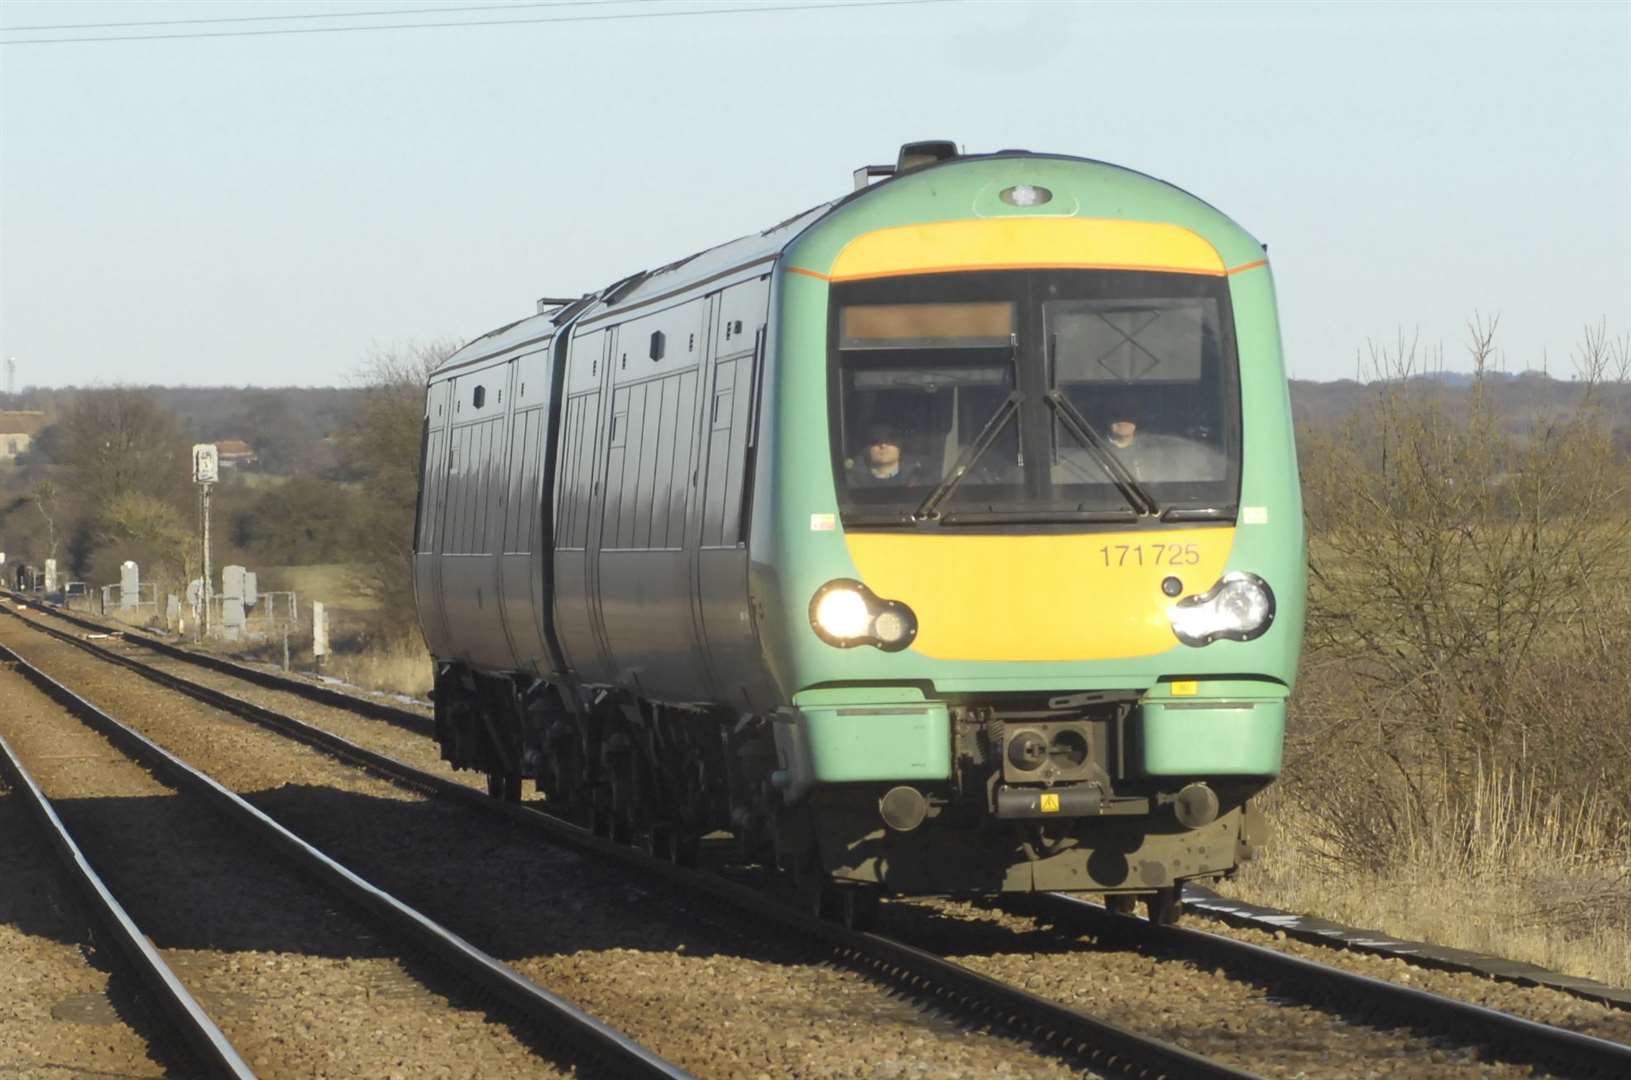 A Southern train came off the tracks at sidings in Tonbridge. Stock pic.